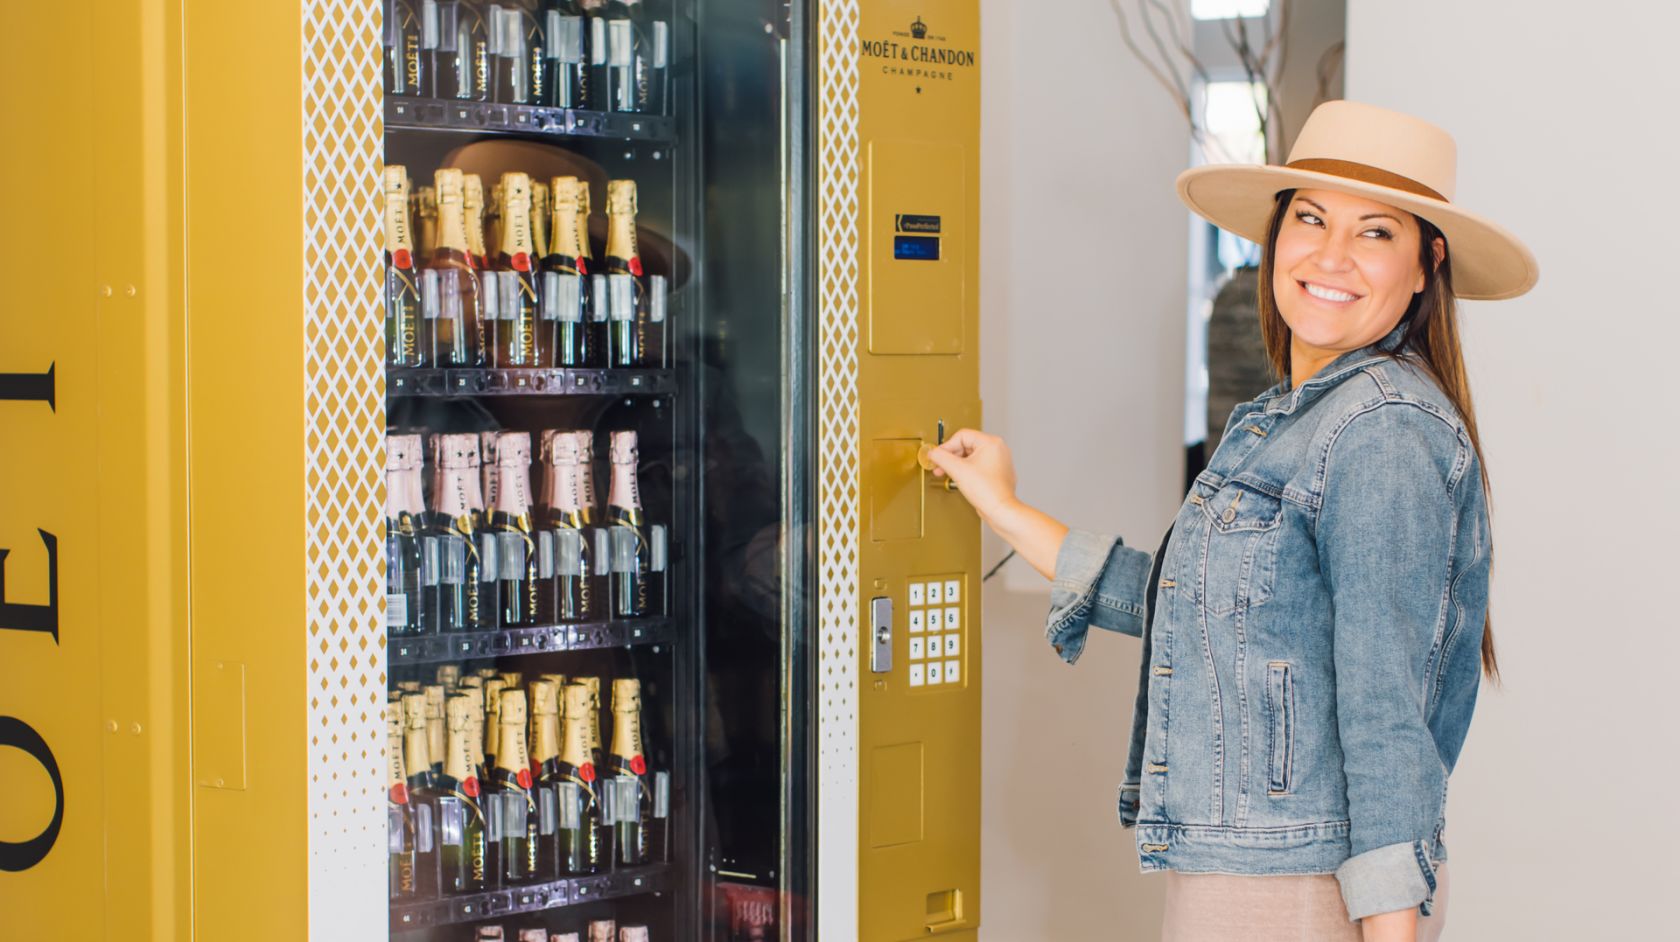 A Person Wearing A Hat And Standing Next To A Vending Machine